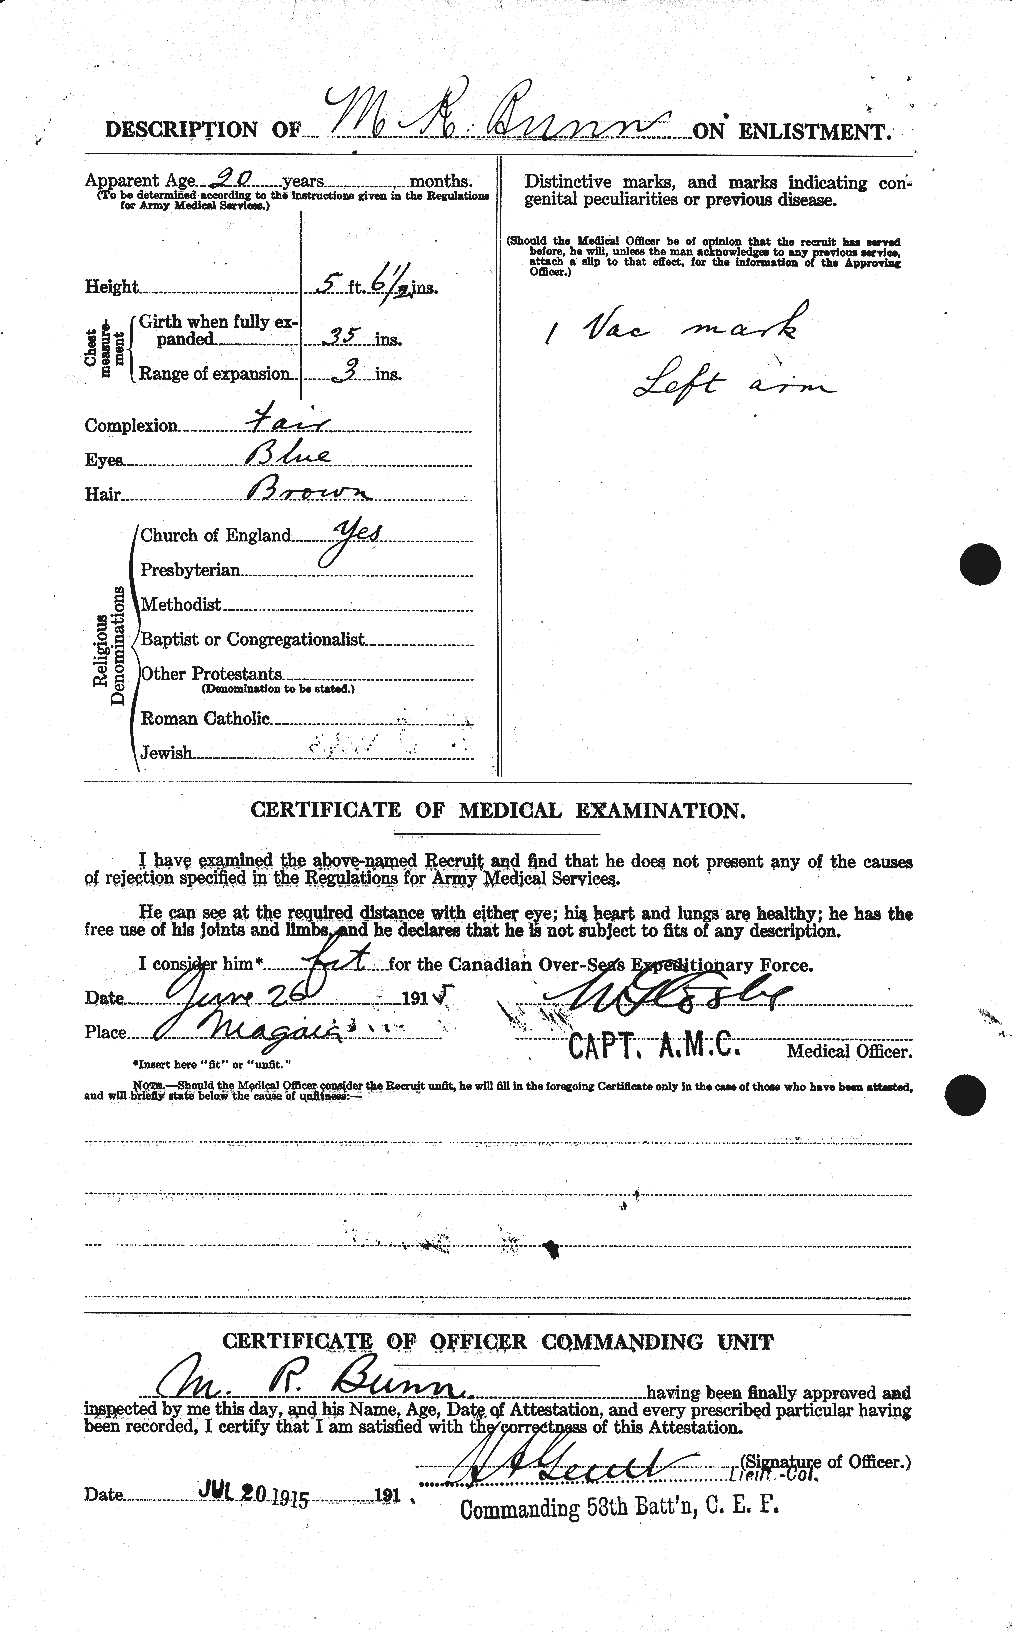 Personnel Records of the First World War - CEF 270422b